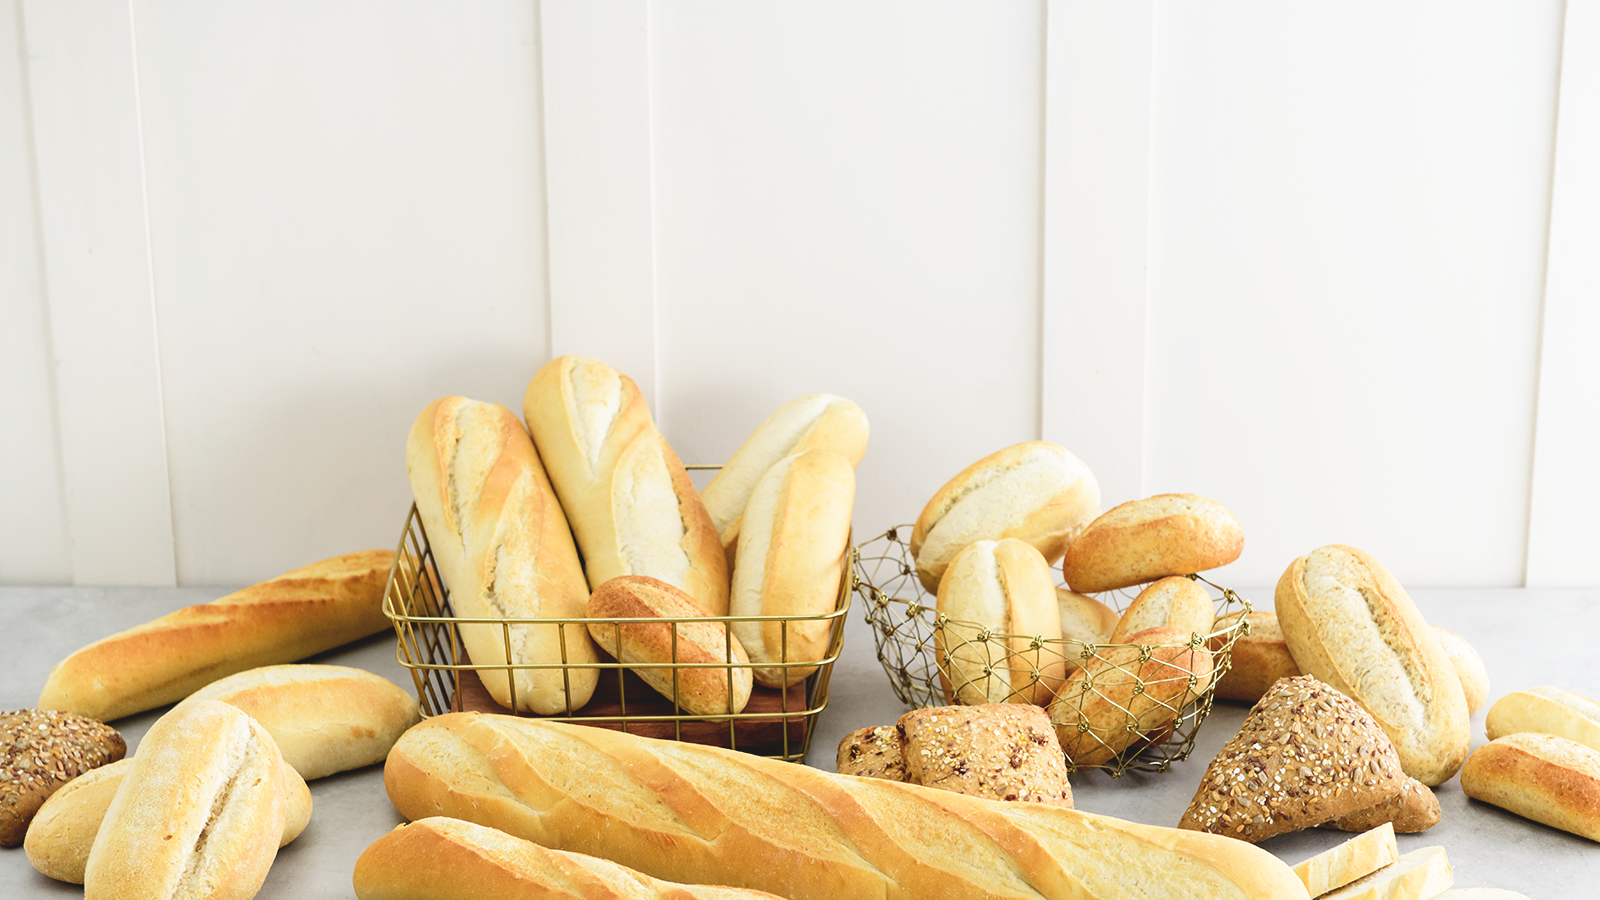 La Francaise Bakery products